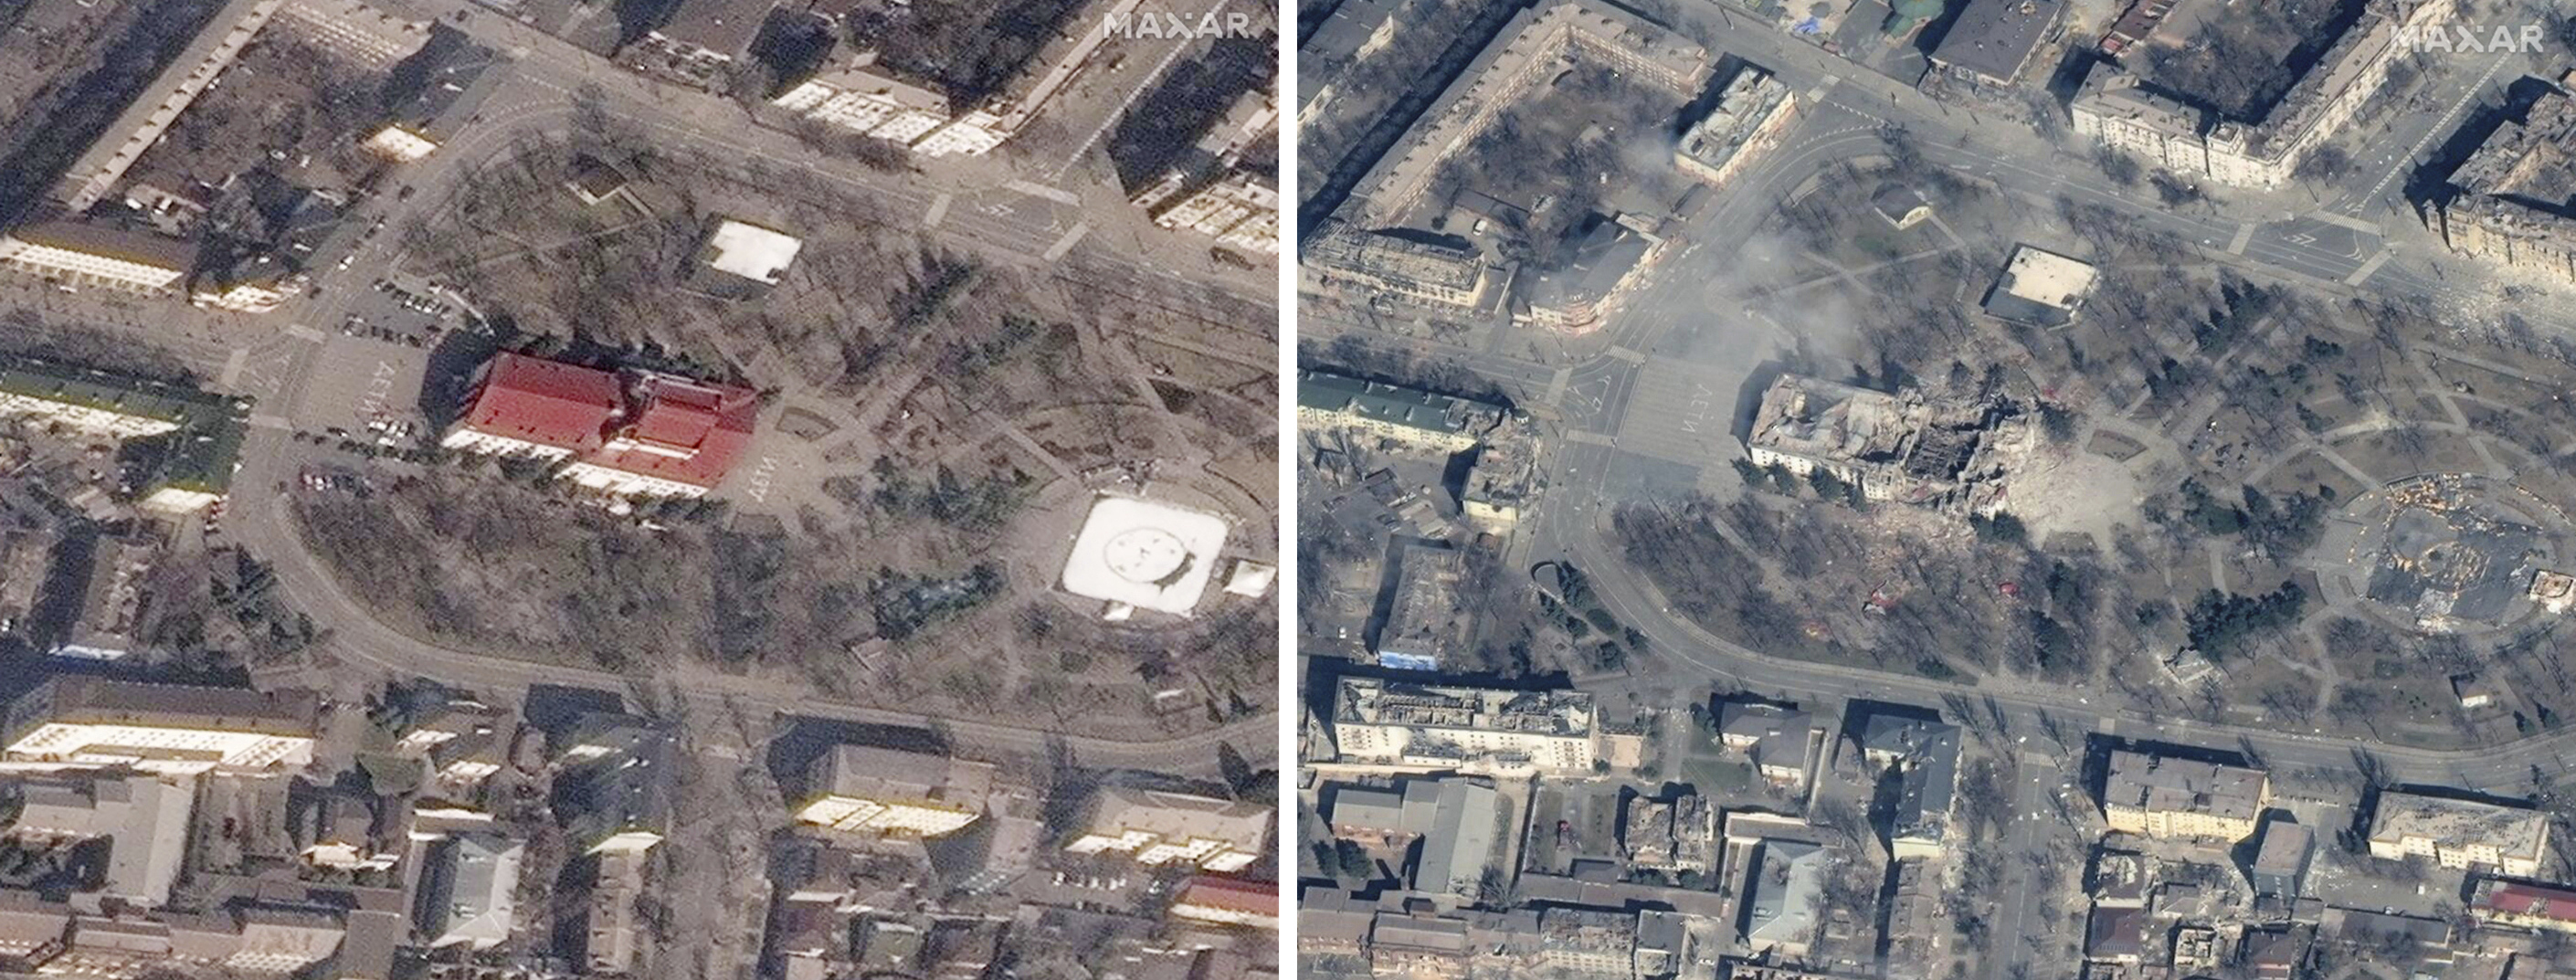 This combination of photos shows the Donetsk Academic Regional Drama Theatre in Mariupol, Ukraine, on March 14 2022, left, before the Russian bombing and after on March 29